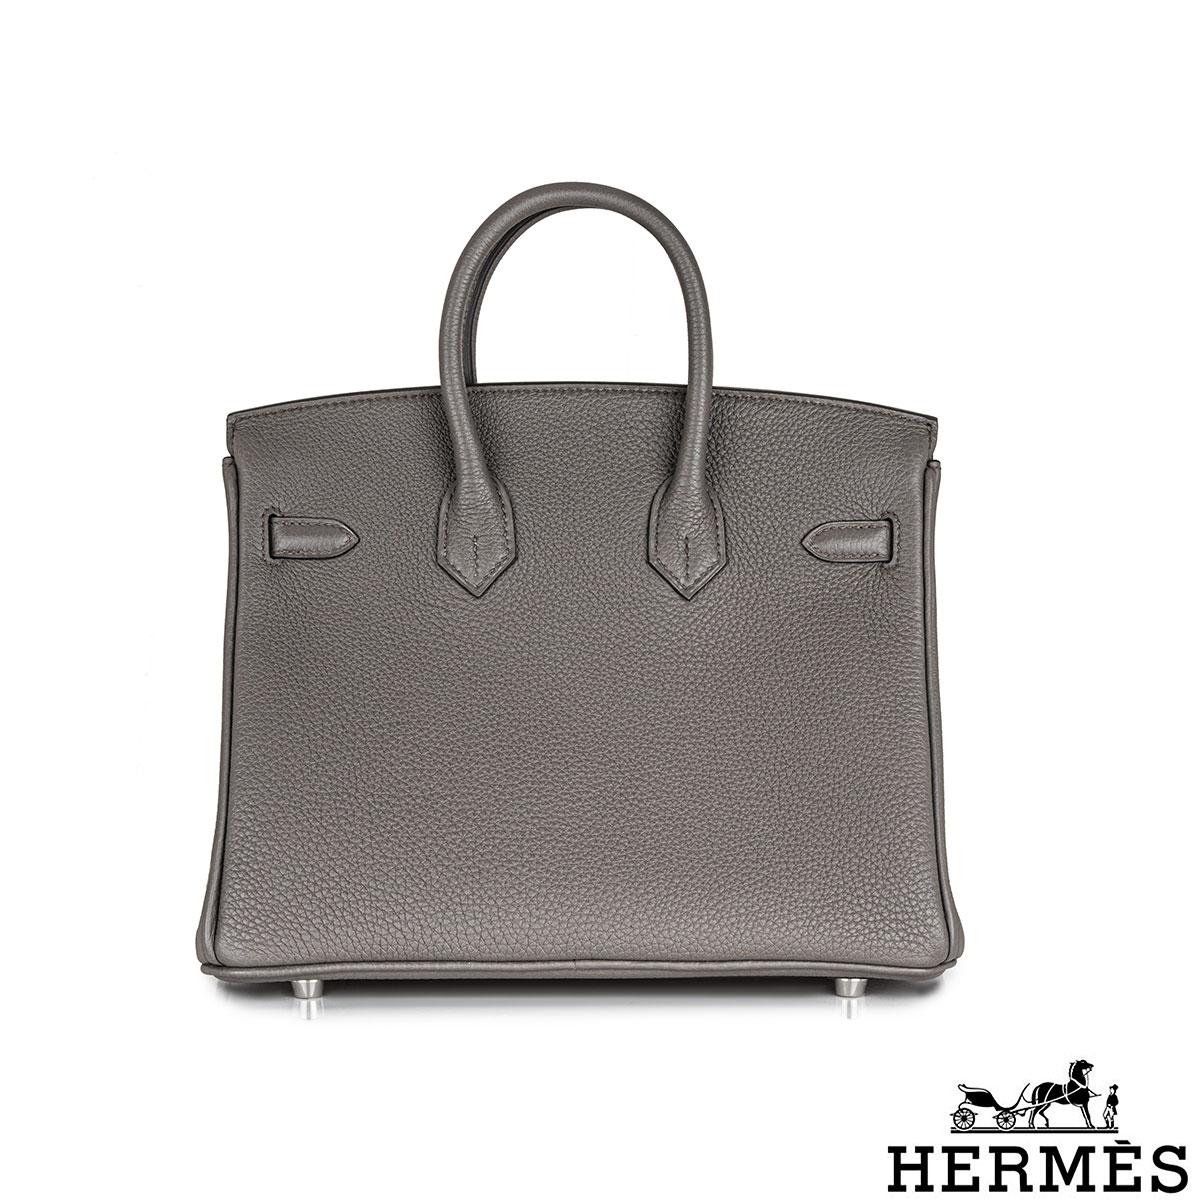 An amazing Hermès Birkin 25cm handbag. The exterior of this Birkin is crafted in Gris Etain Veau leather with tonal stitching. It features palladium hardware with two straps and front toggle closure. The interior has a zip pocket with an Hermès